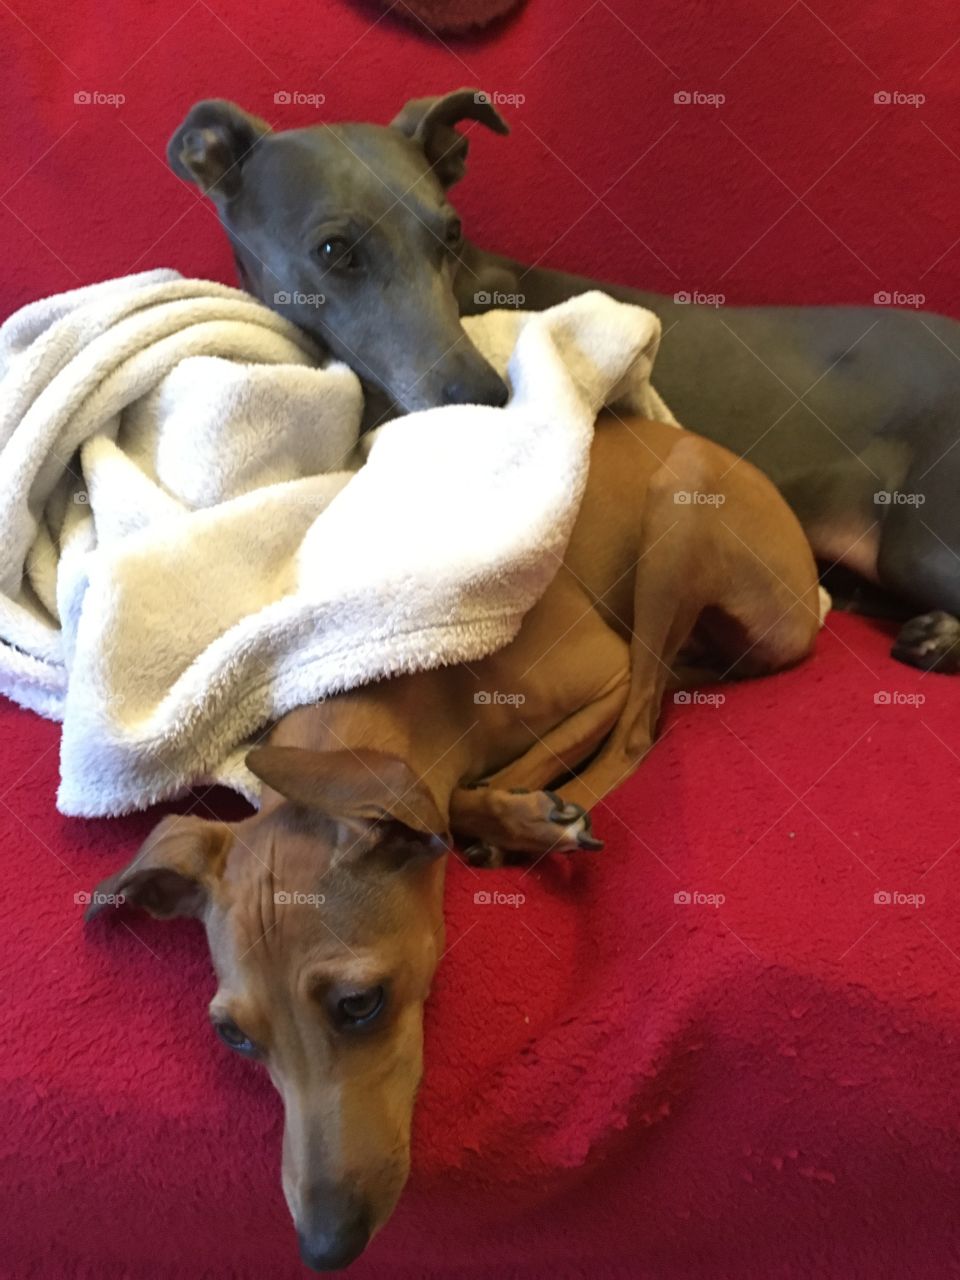 Libby the blue whippet and Amber the fawn Italian greyhound puppy snuggling on the sofa